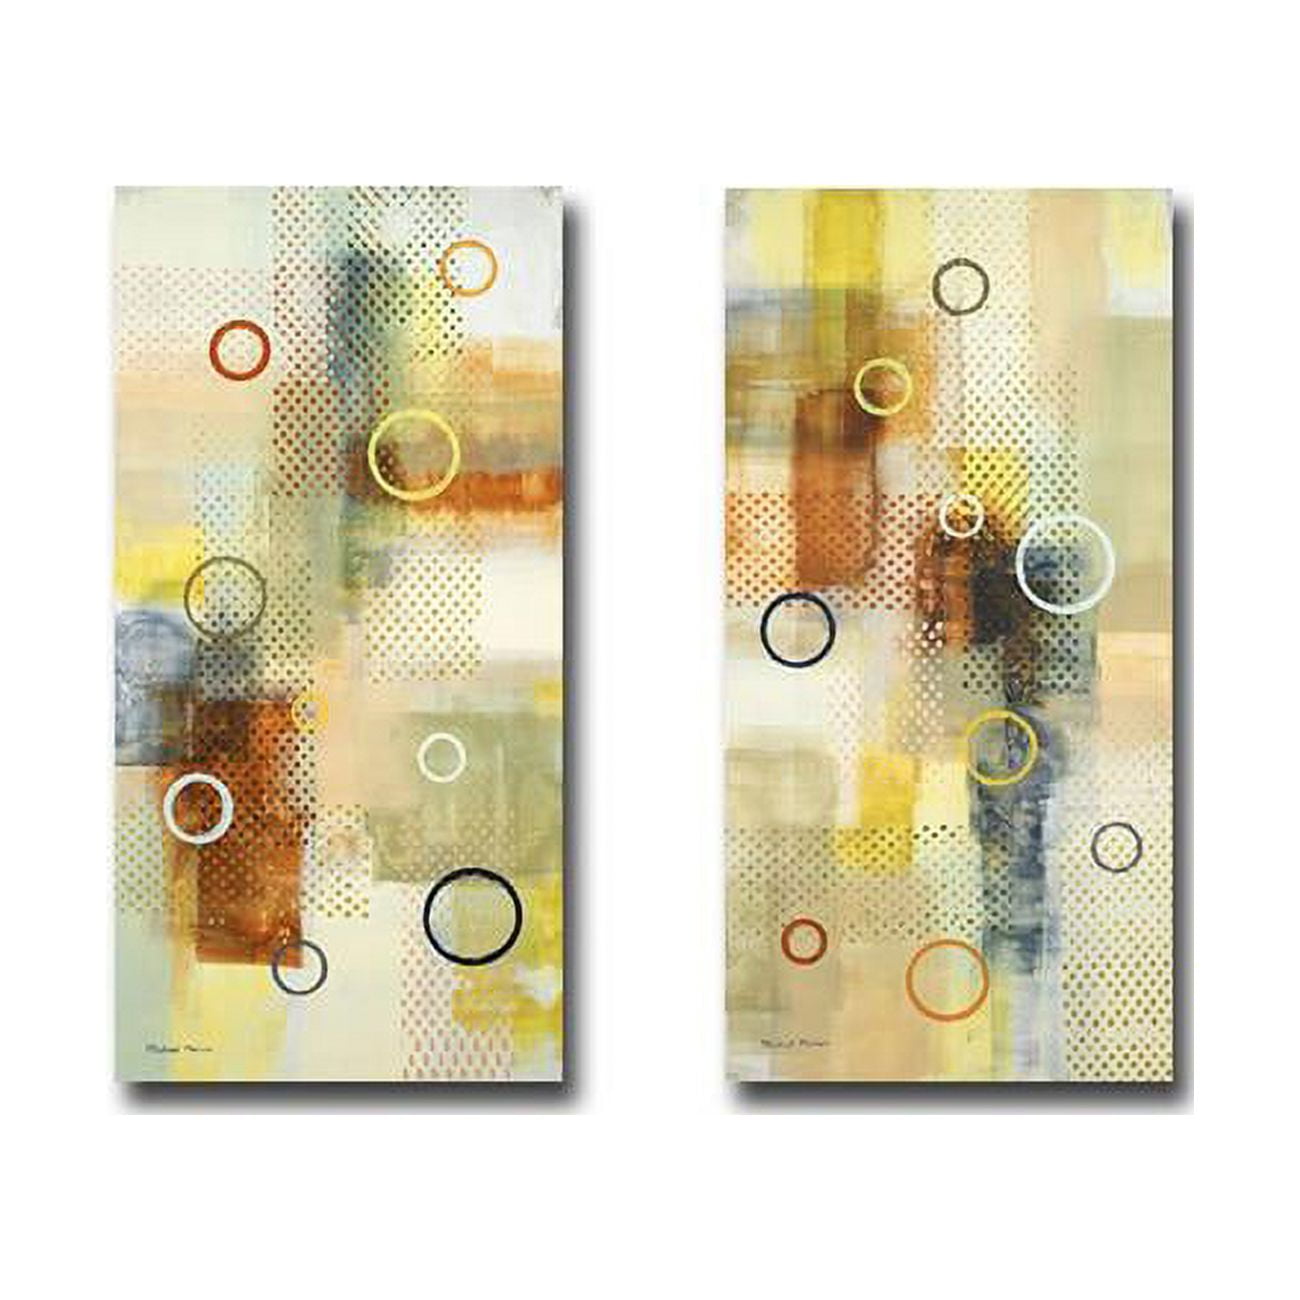 1224871sg Floating Forms I & Ii By Michael Marcon Premium Gallery-wrapped Canvas Giclee Art Set - Ready To Hang, 12 X 24 X 1.5 In.